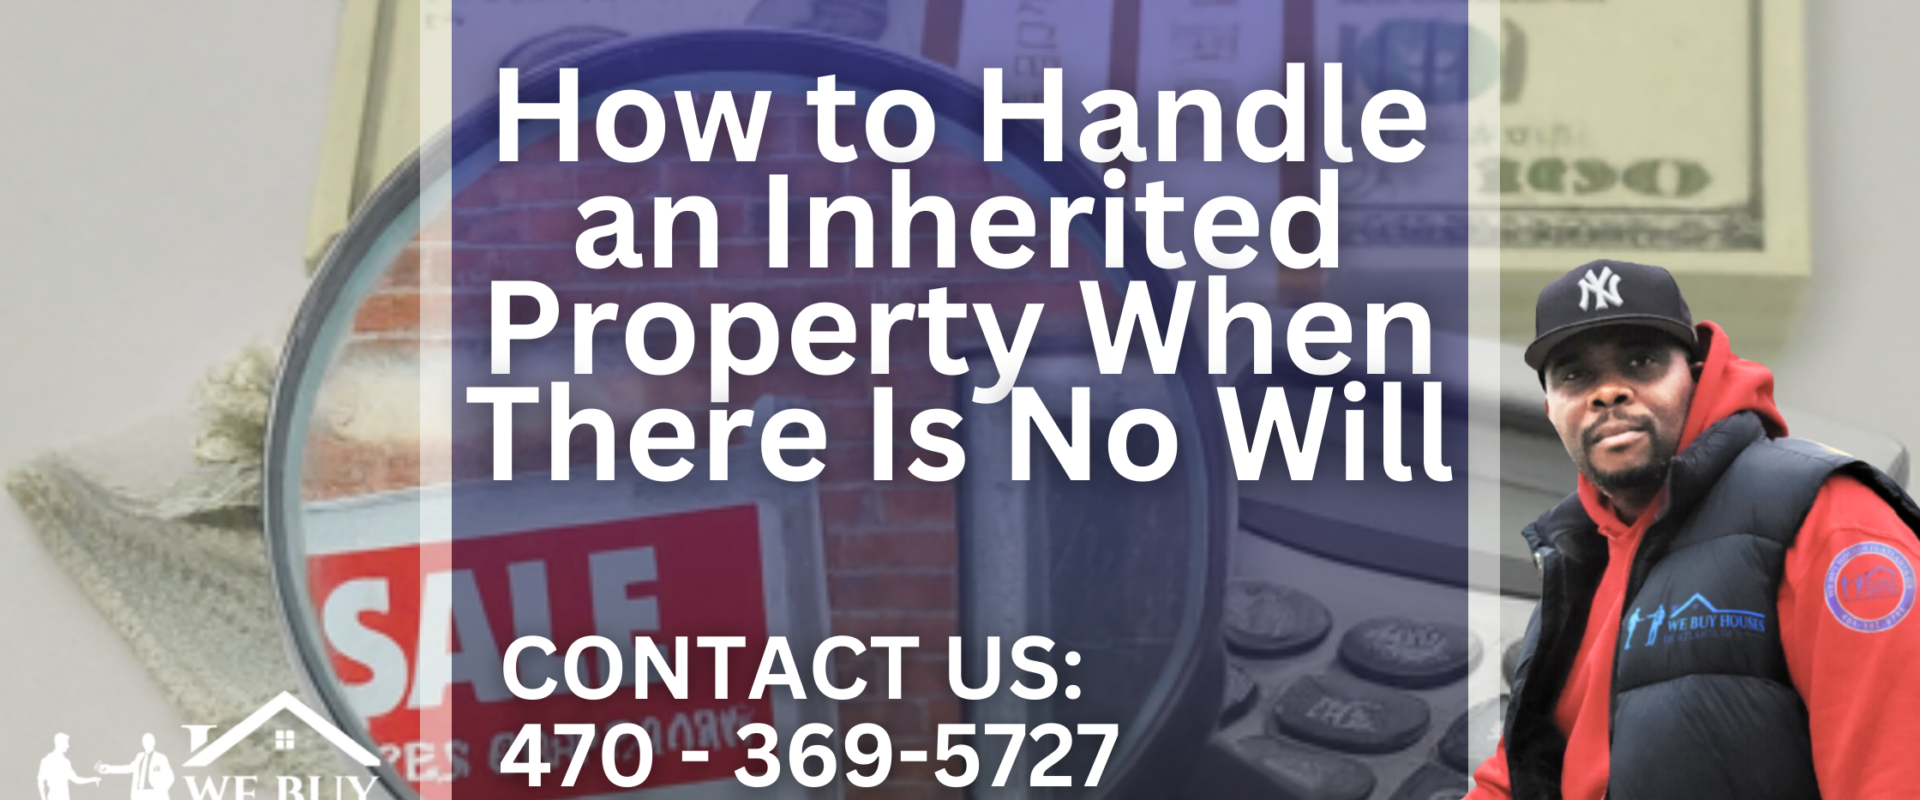 How to Handle an Inherited Property When There Is No Will